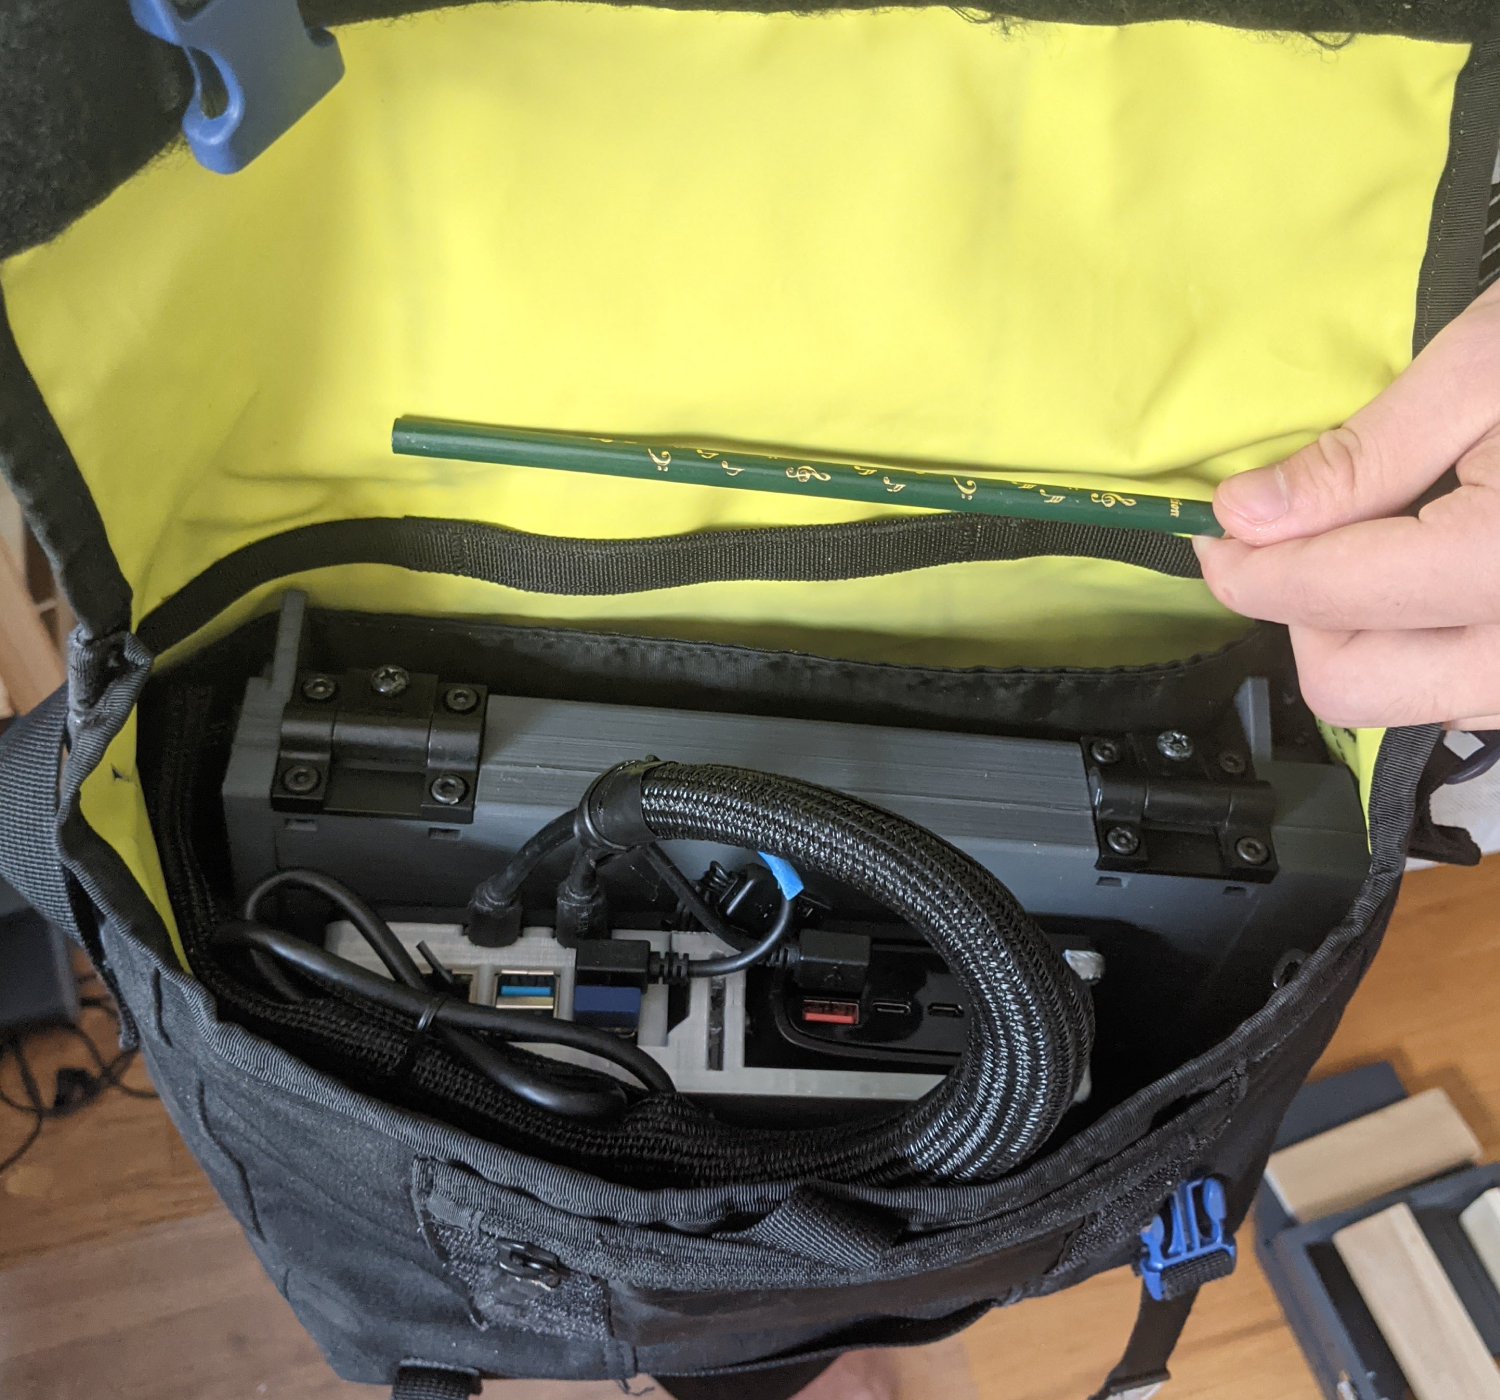 The laptop fitting inside the bag